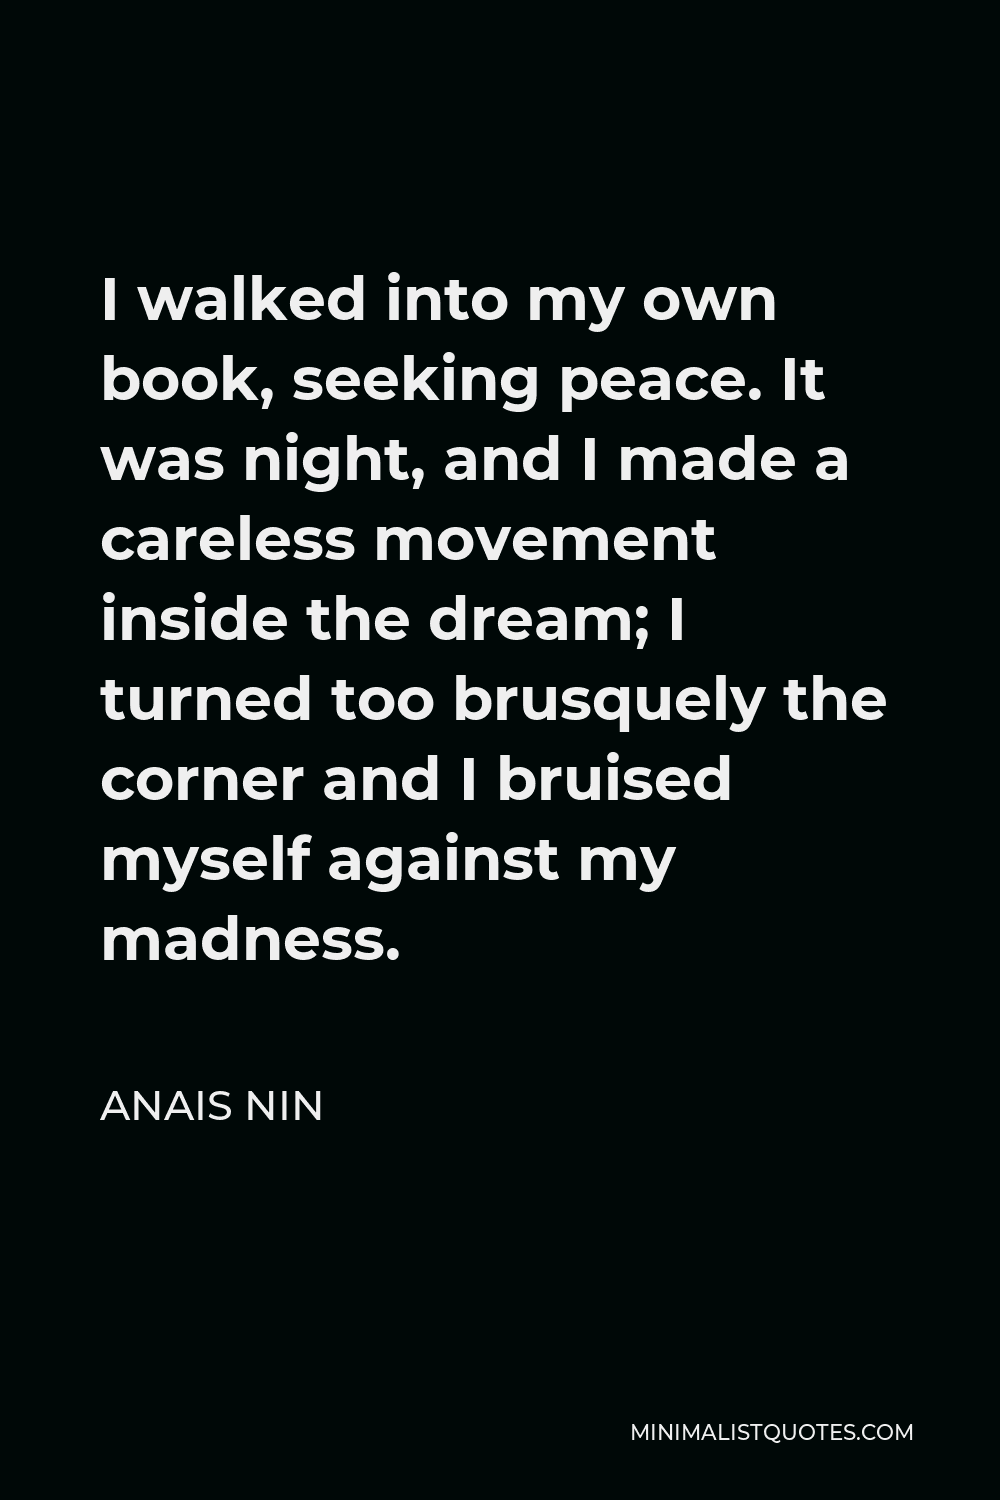 Anais Nin Quote - I walked into my own book, seeking peace. It was night, and I made a careless movement inside the dream; I turned too brusquely the corner and I bruised myself against my madness.